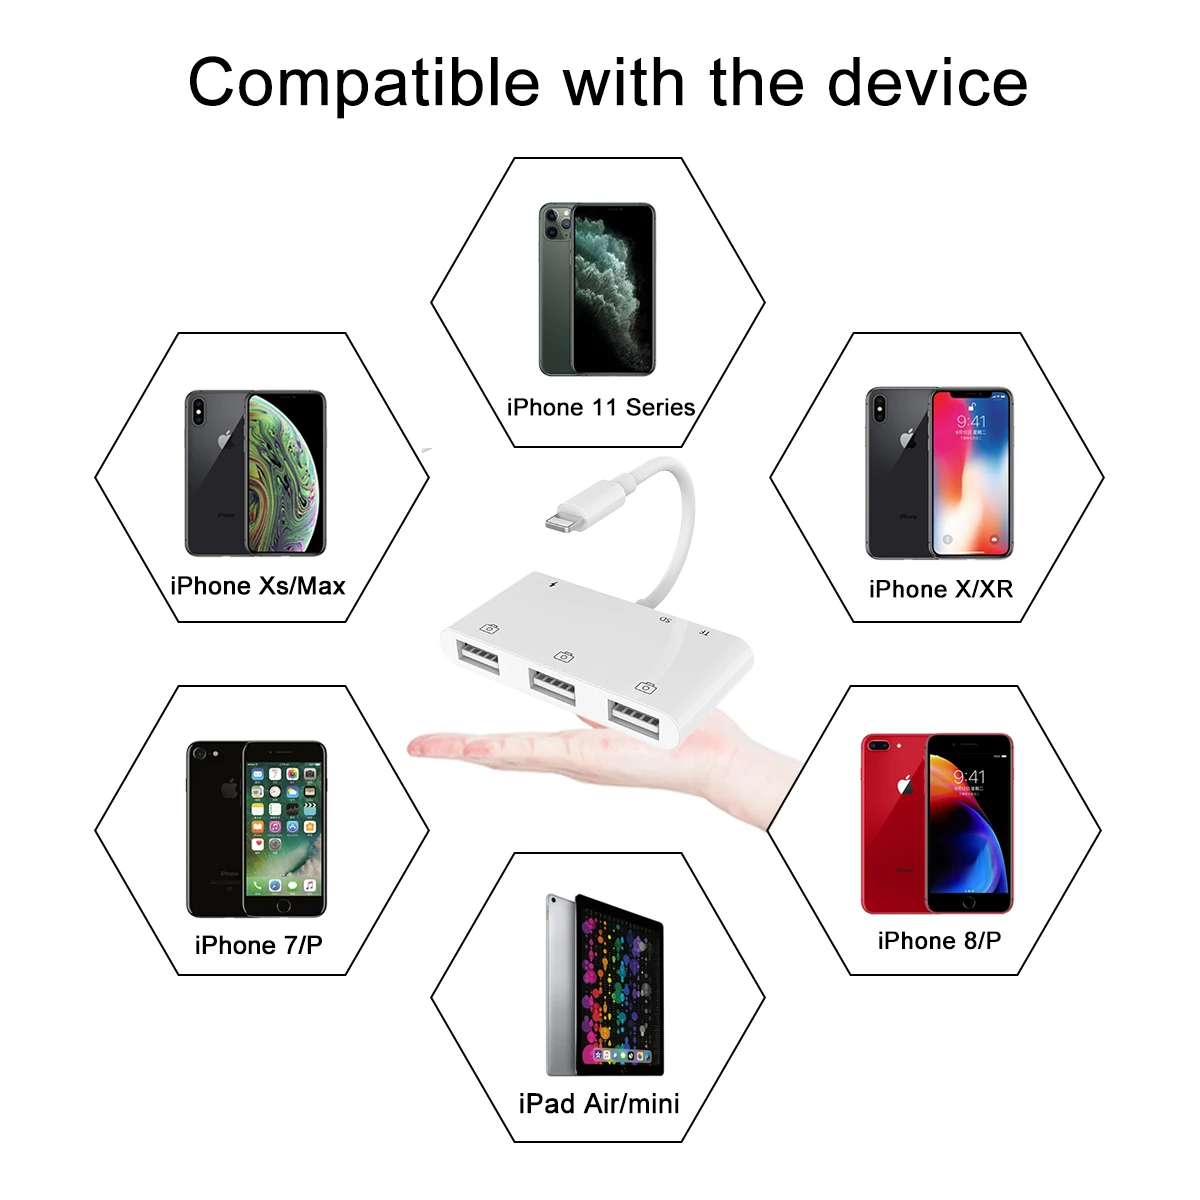 
Lighting USB OTG Camera Adapter USB HUB Camera Card Reader Connector Cable for iPhone 